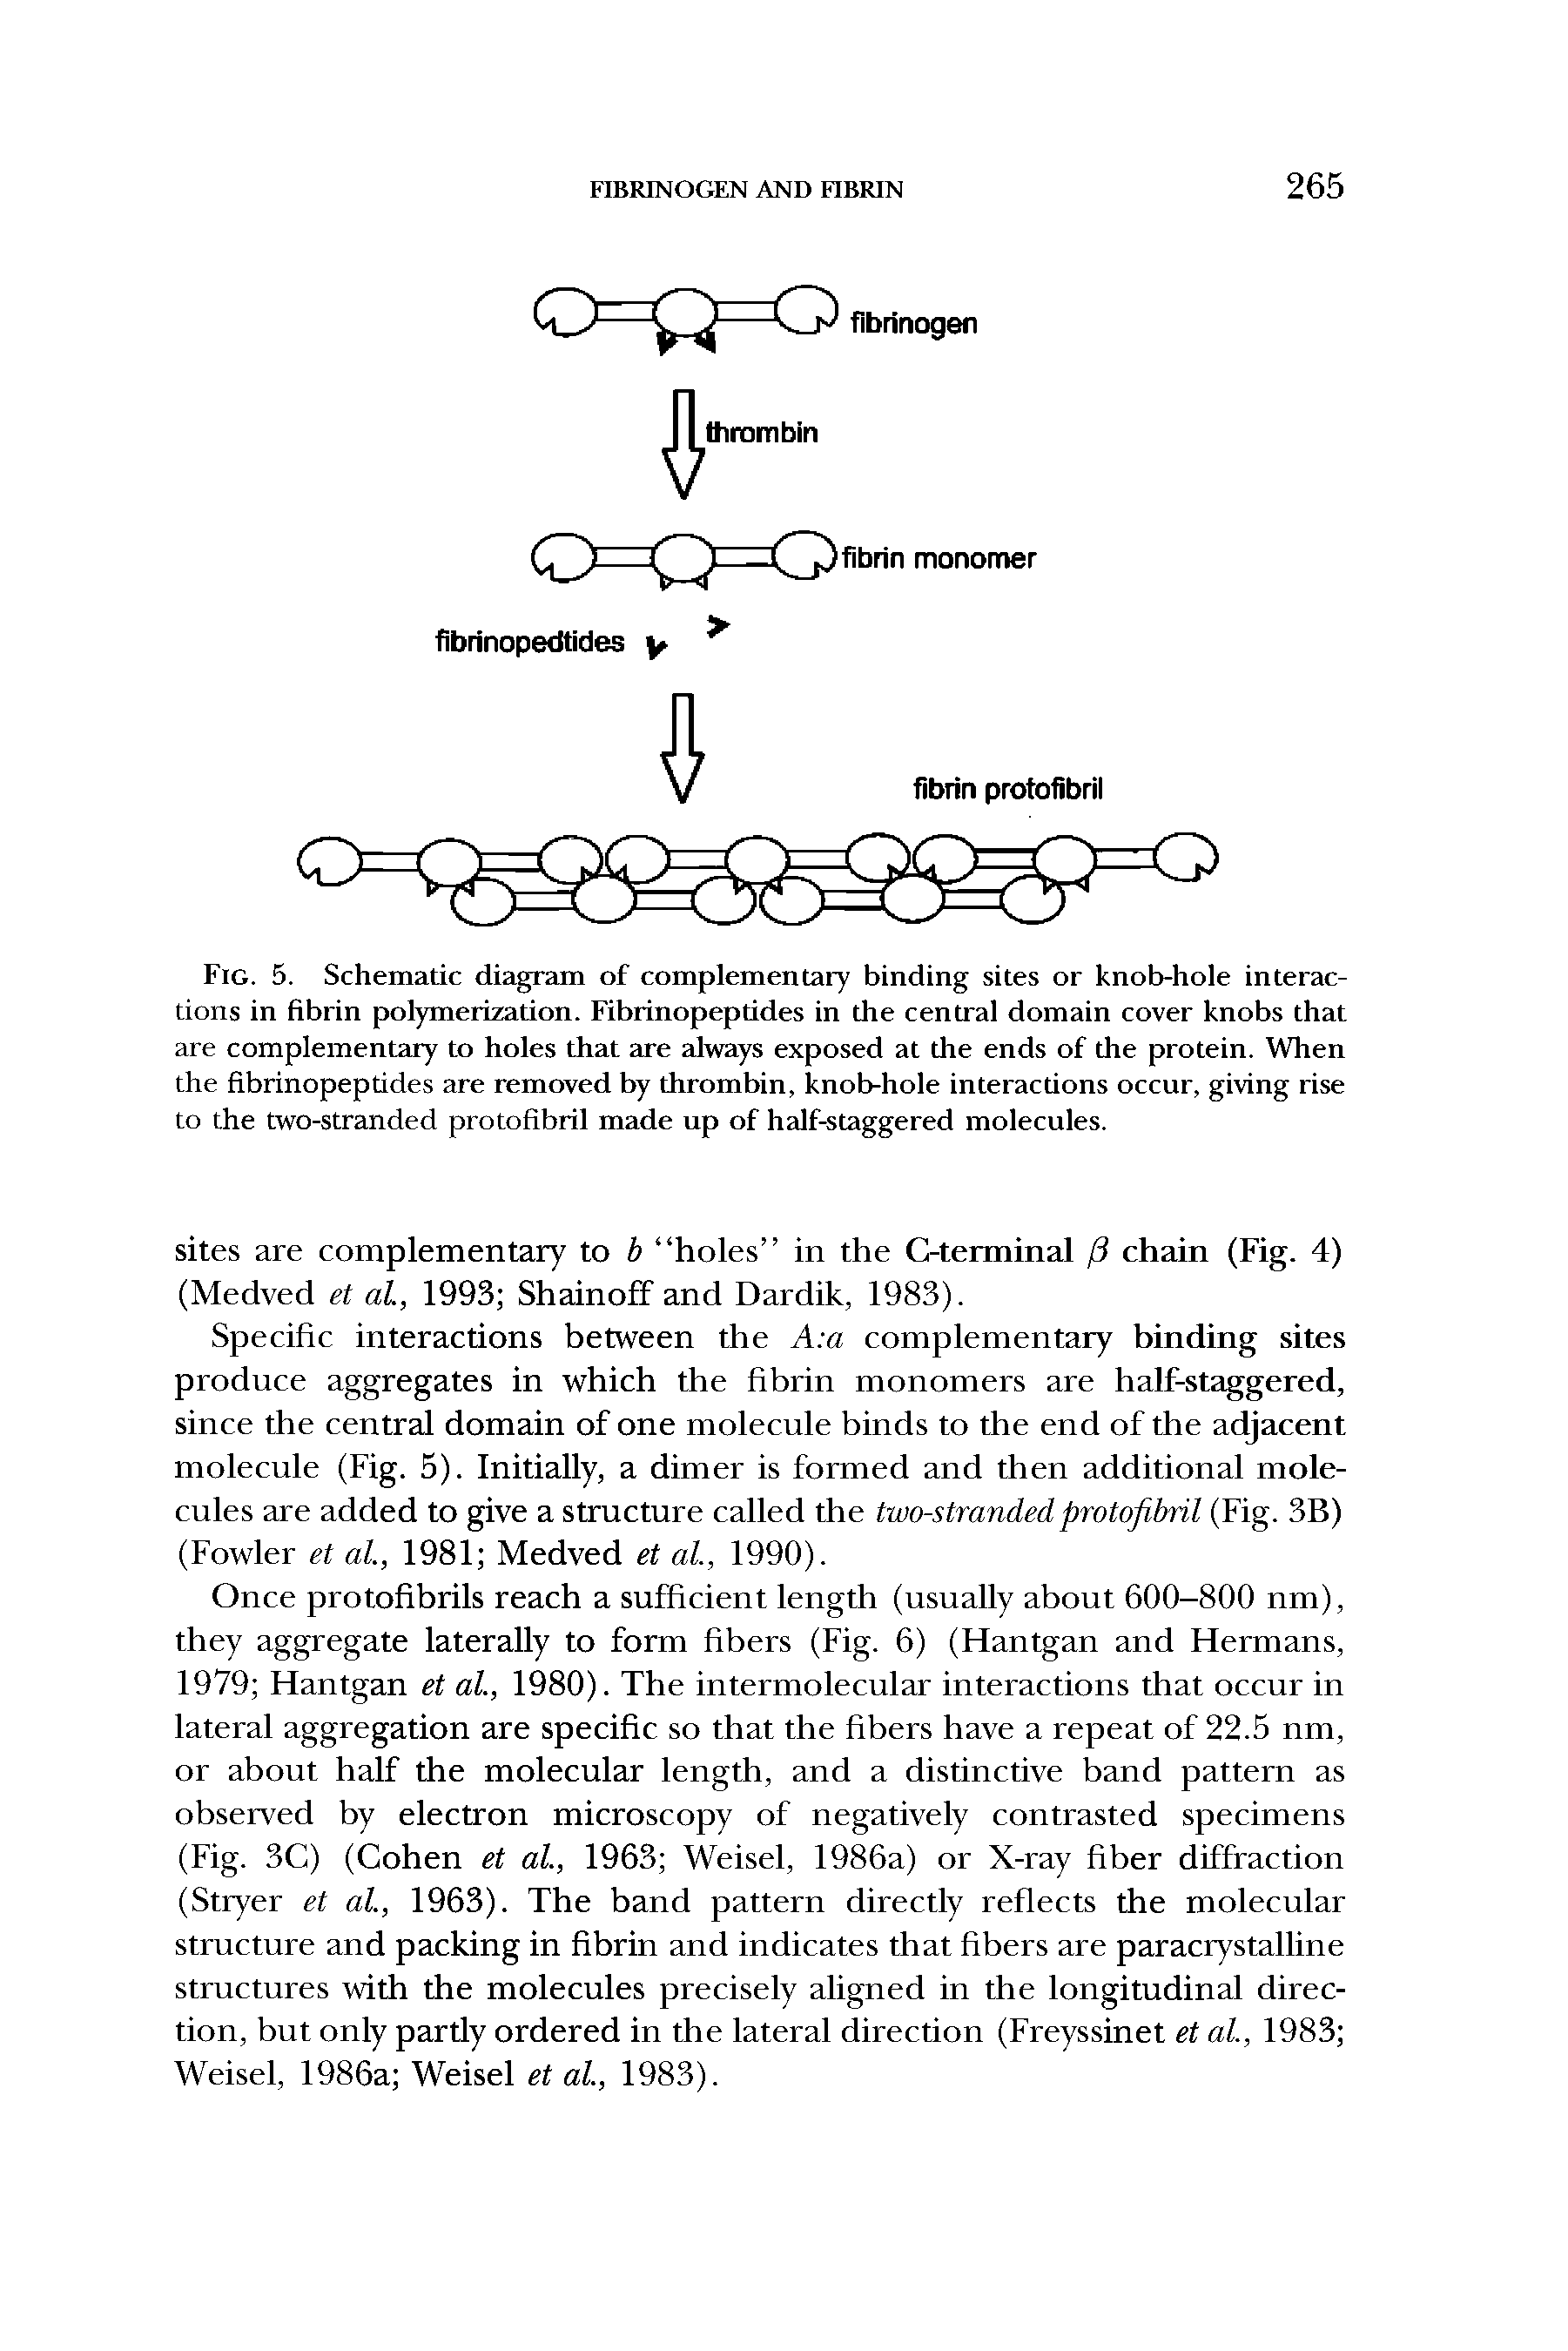 Fig. 5. Schematic diagram of complementary binding sites or knob-hole interactions in fibrin polymerization. Fibrinopeptides in the central domain cover knobs that are complementary to holes that are always exposed at the ends of the protein. When the fibrinopeptides are removed by thrombin, knob-hole interactions occur, giving rise to the two-stranded protofibril made up of half-staggered molecules.